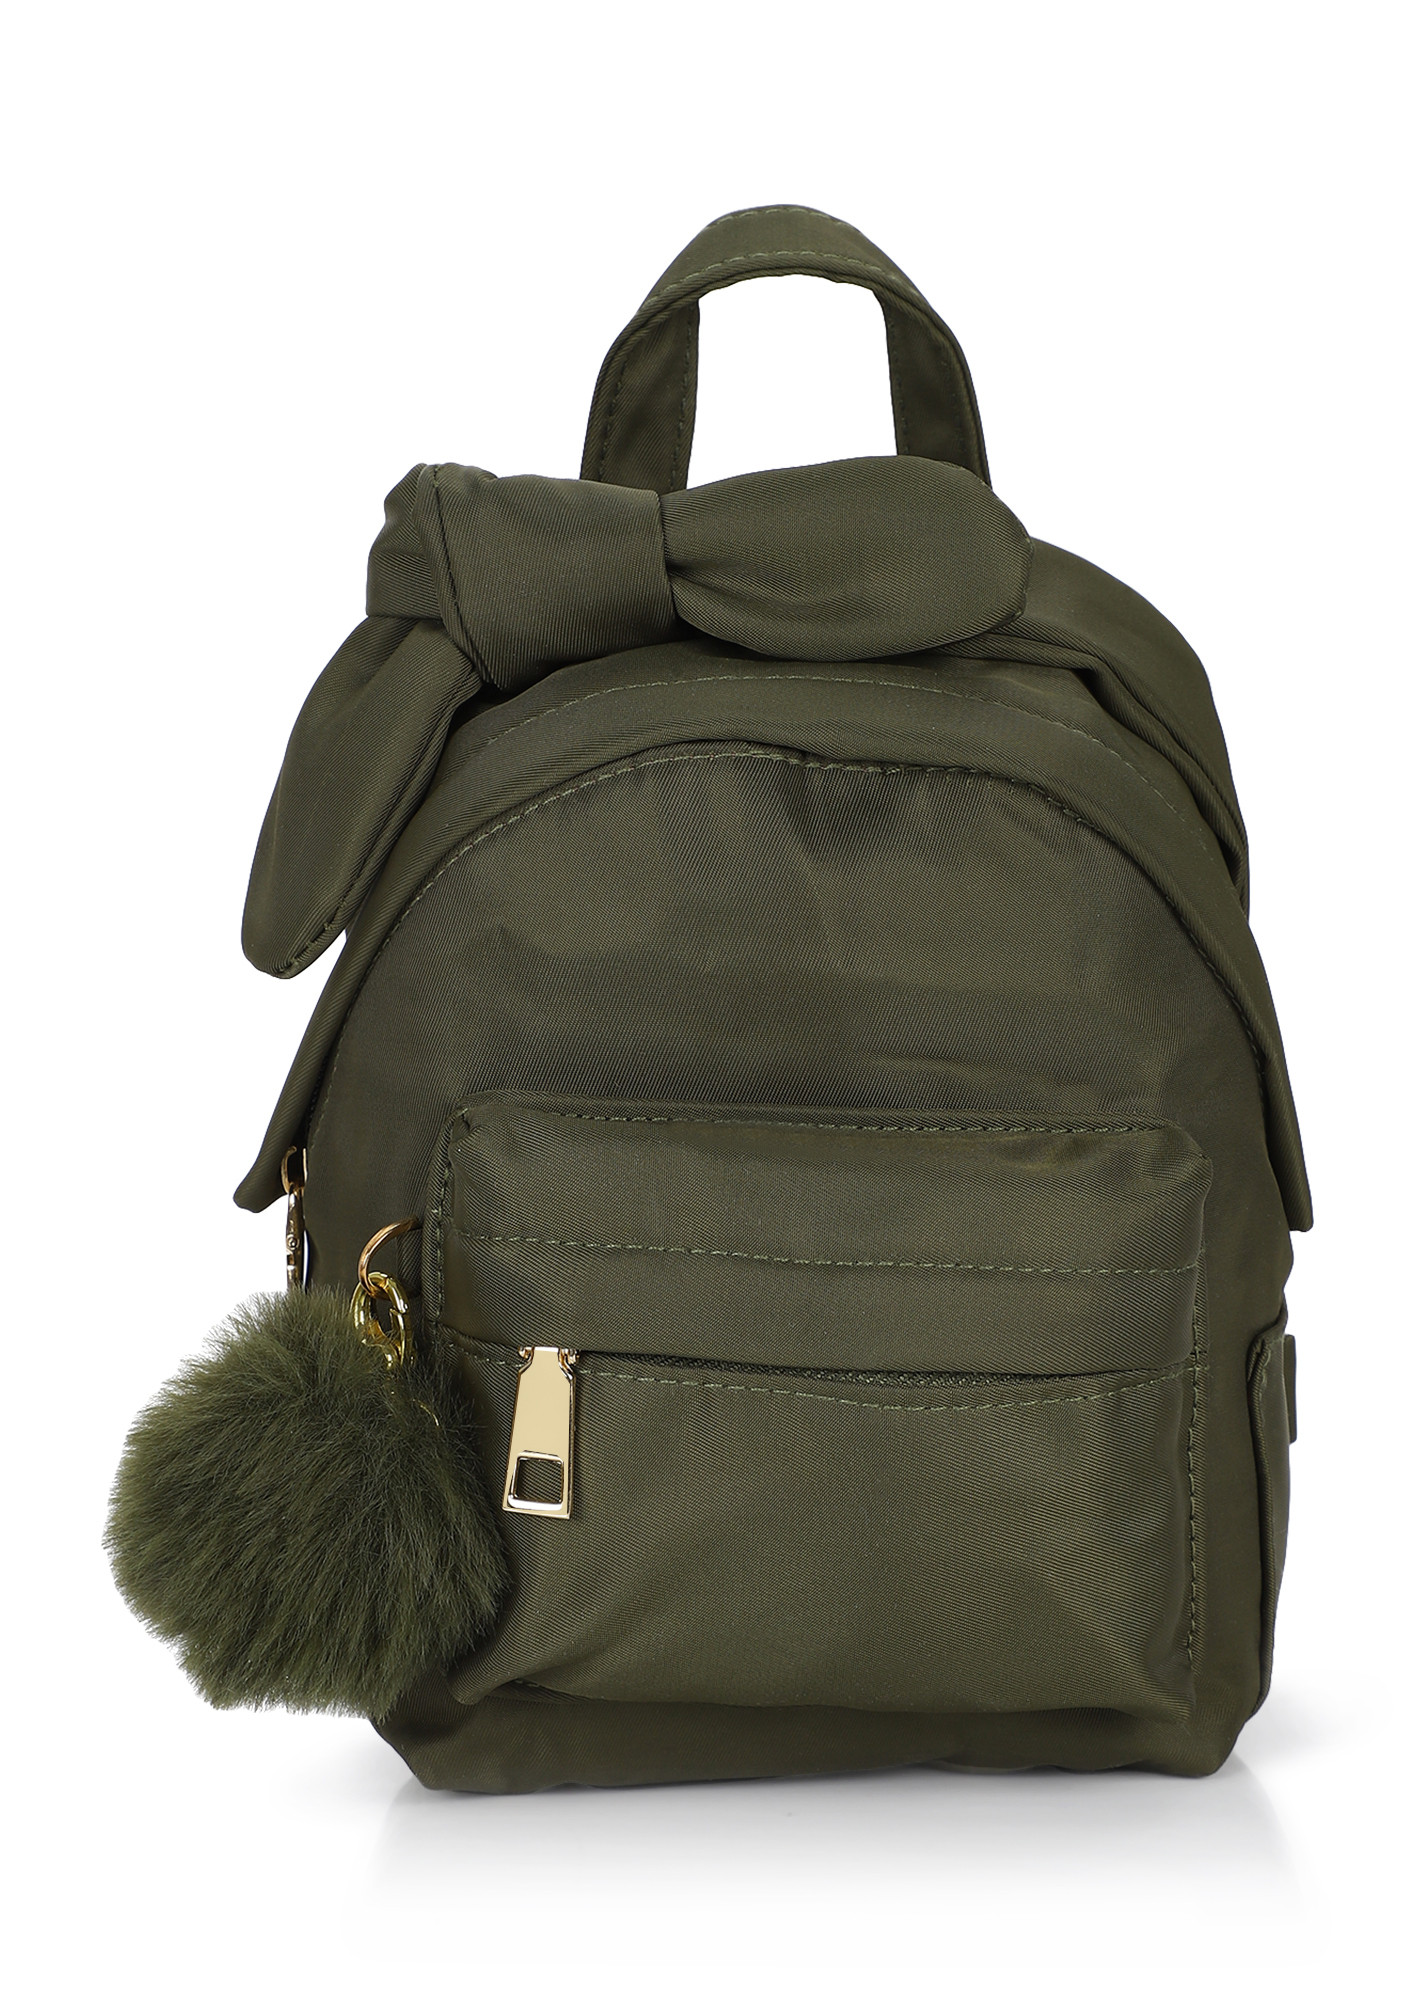 LET'S VACAY NOW OLIVE GREEN BACKPACK